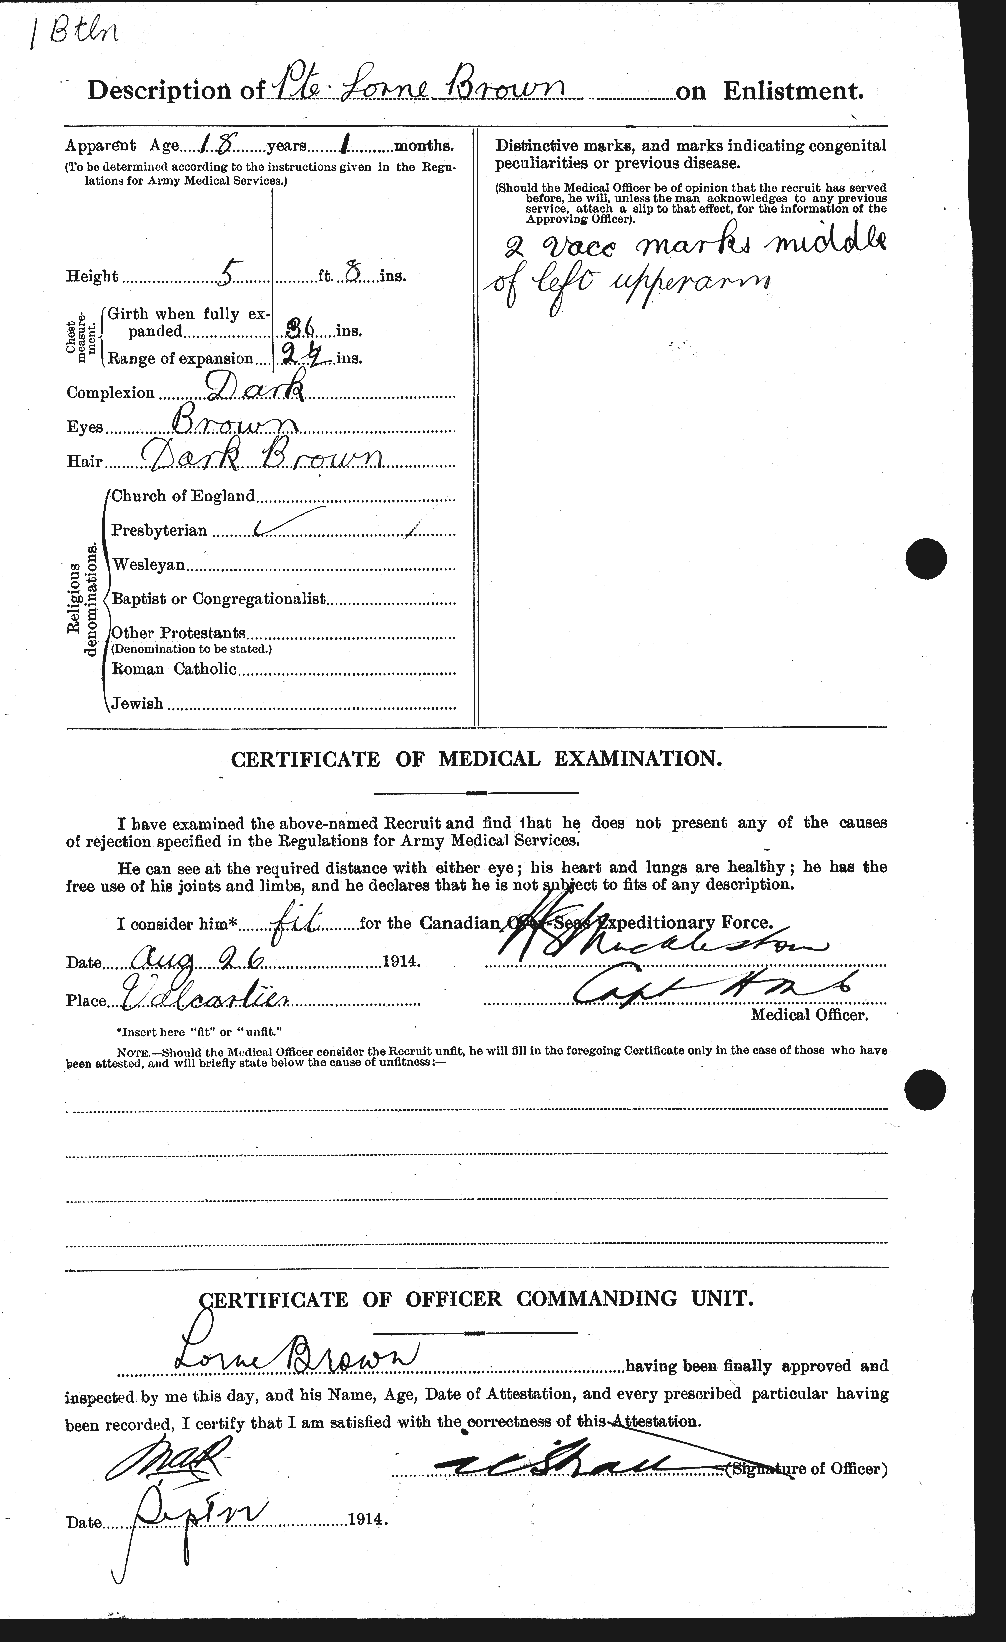 Personnel Records of the First World War - CEF 266331b